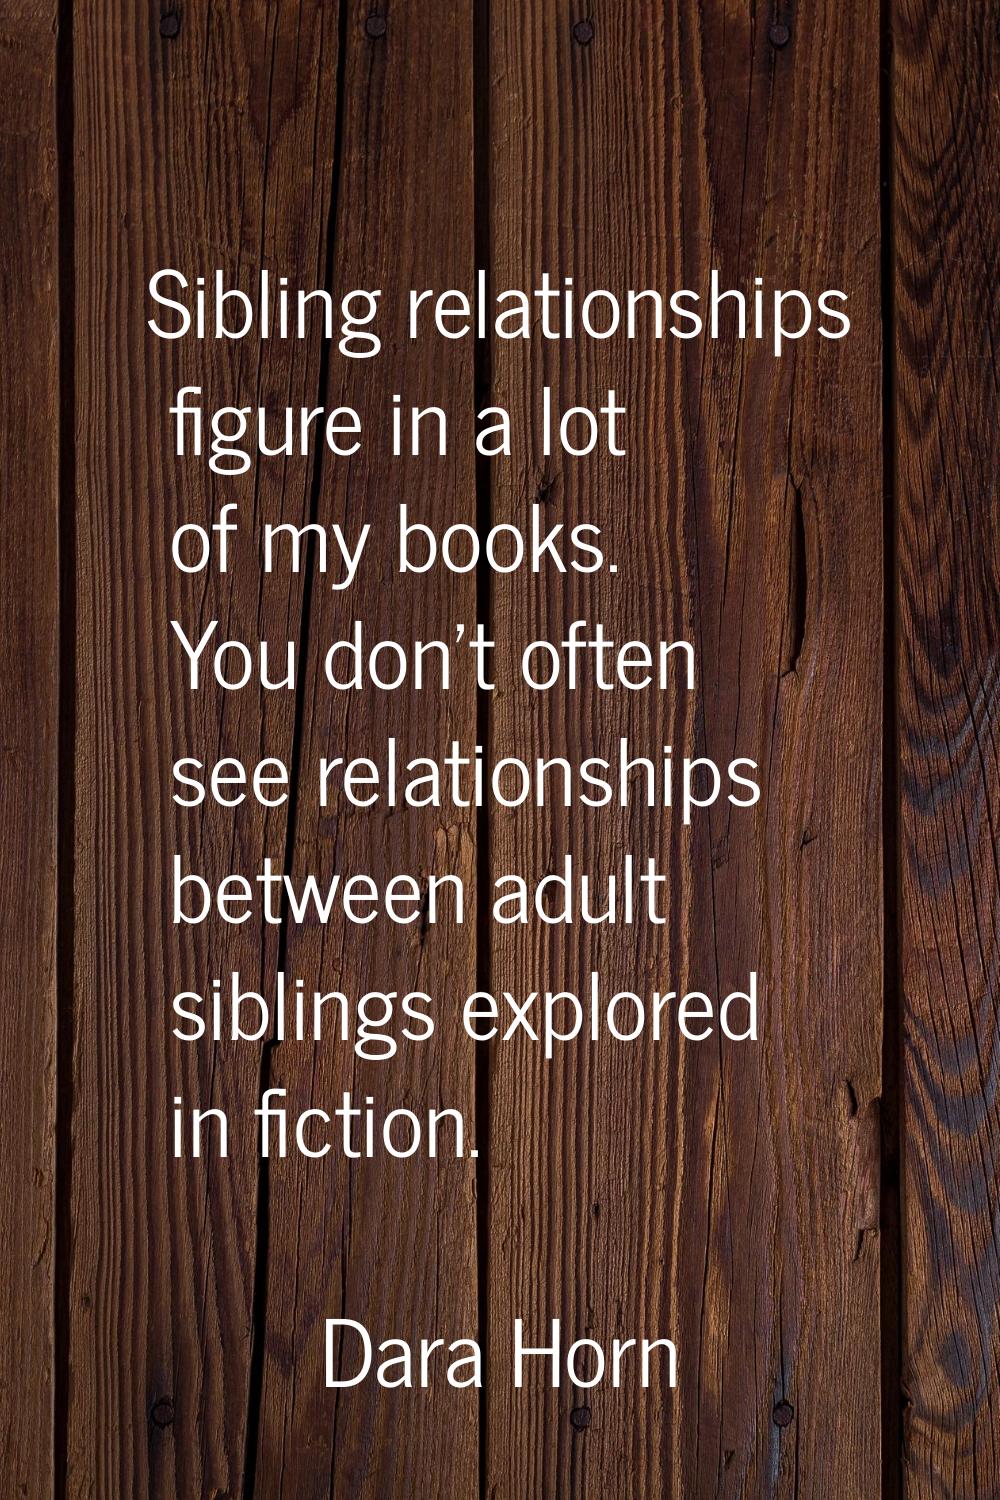 Sibling relationships figure in a lot of my books. You don't often see relationships between adult 